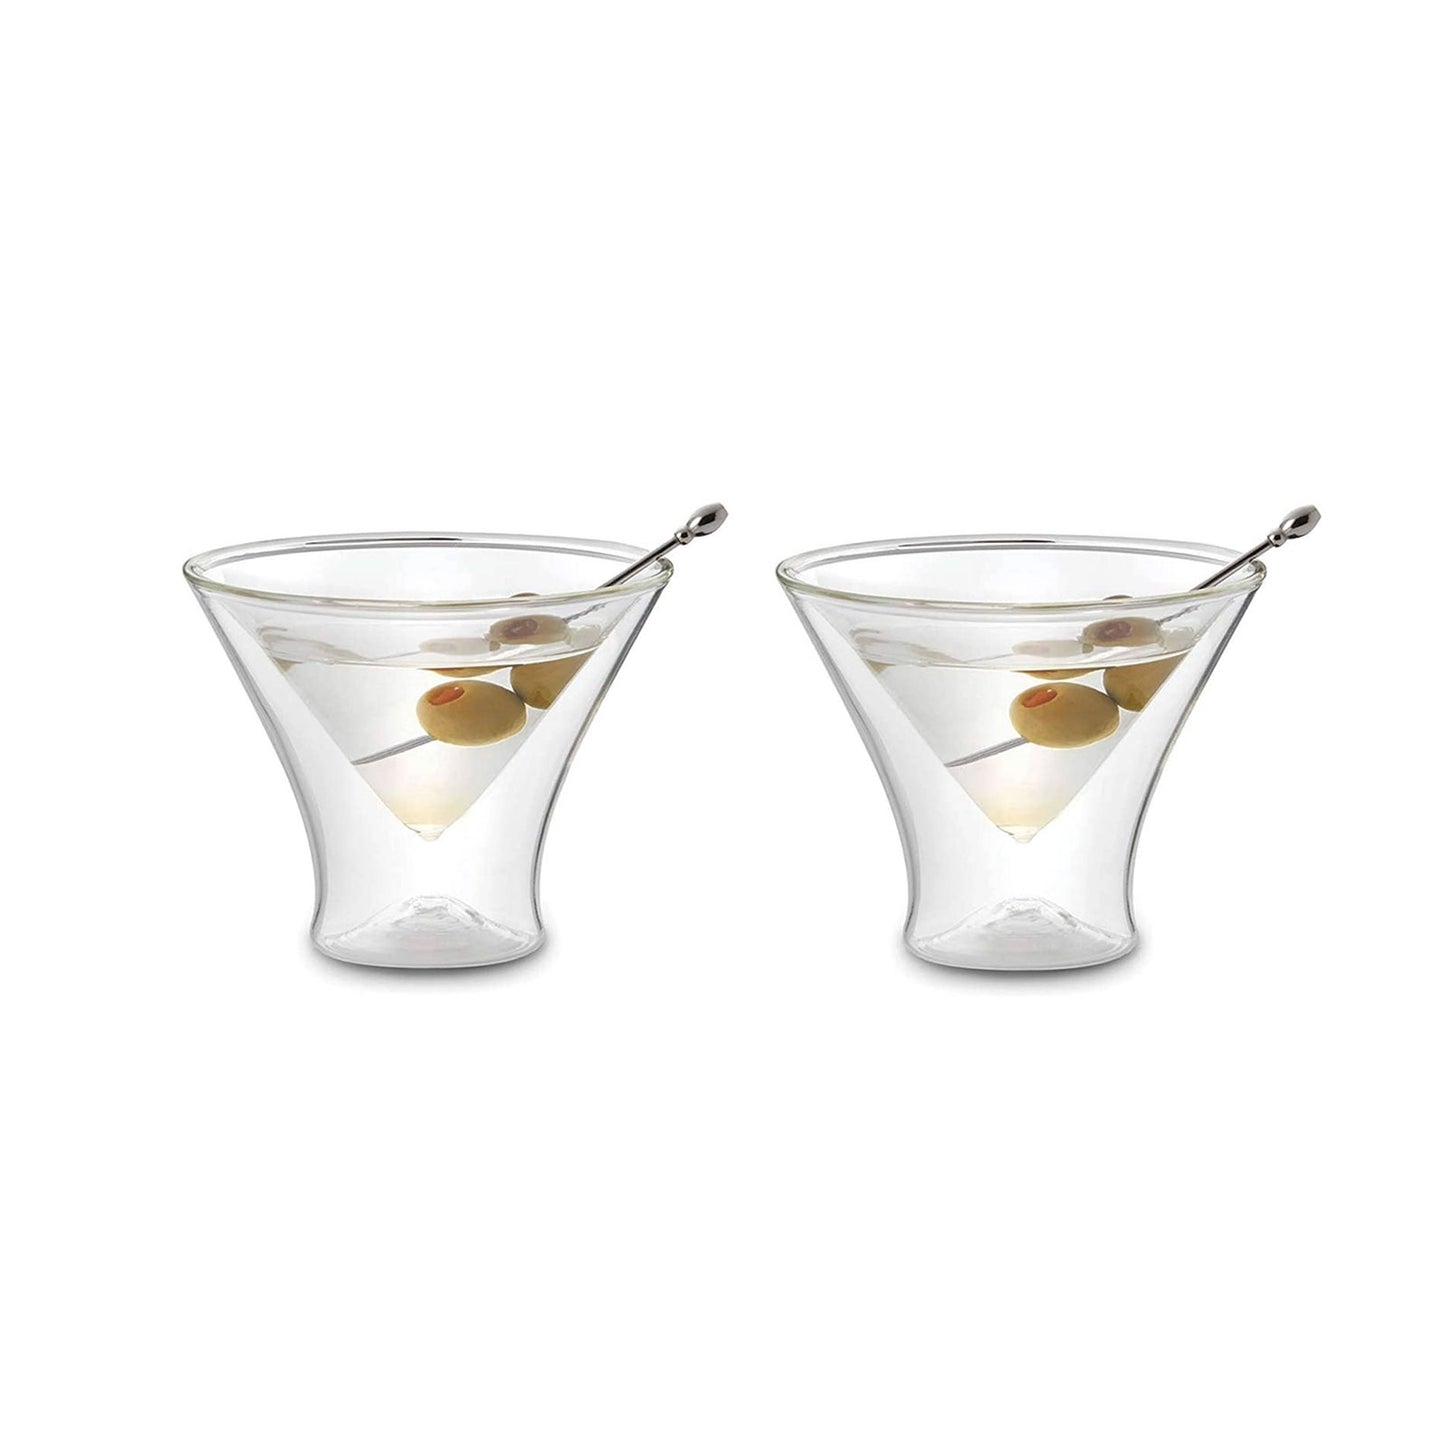 Double Wall Martini Glasses, Set of 2